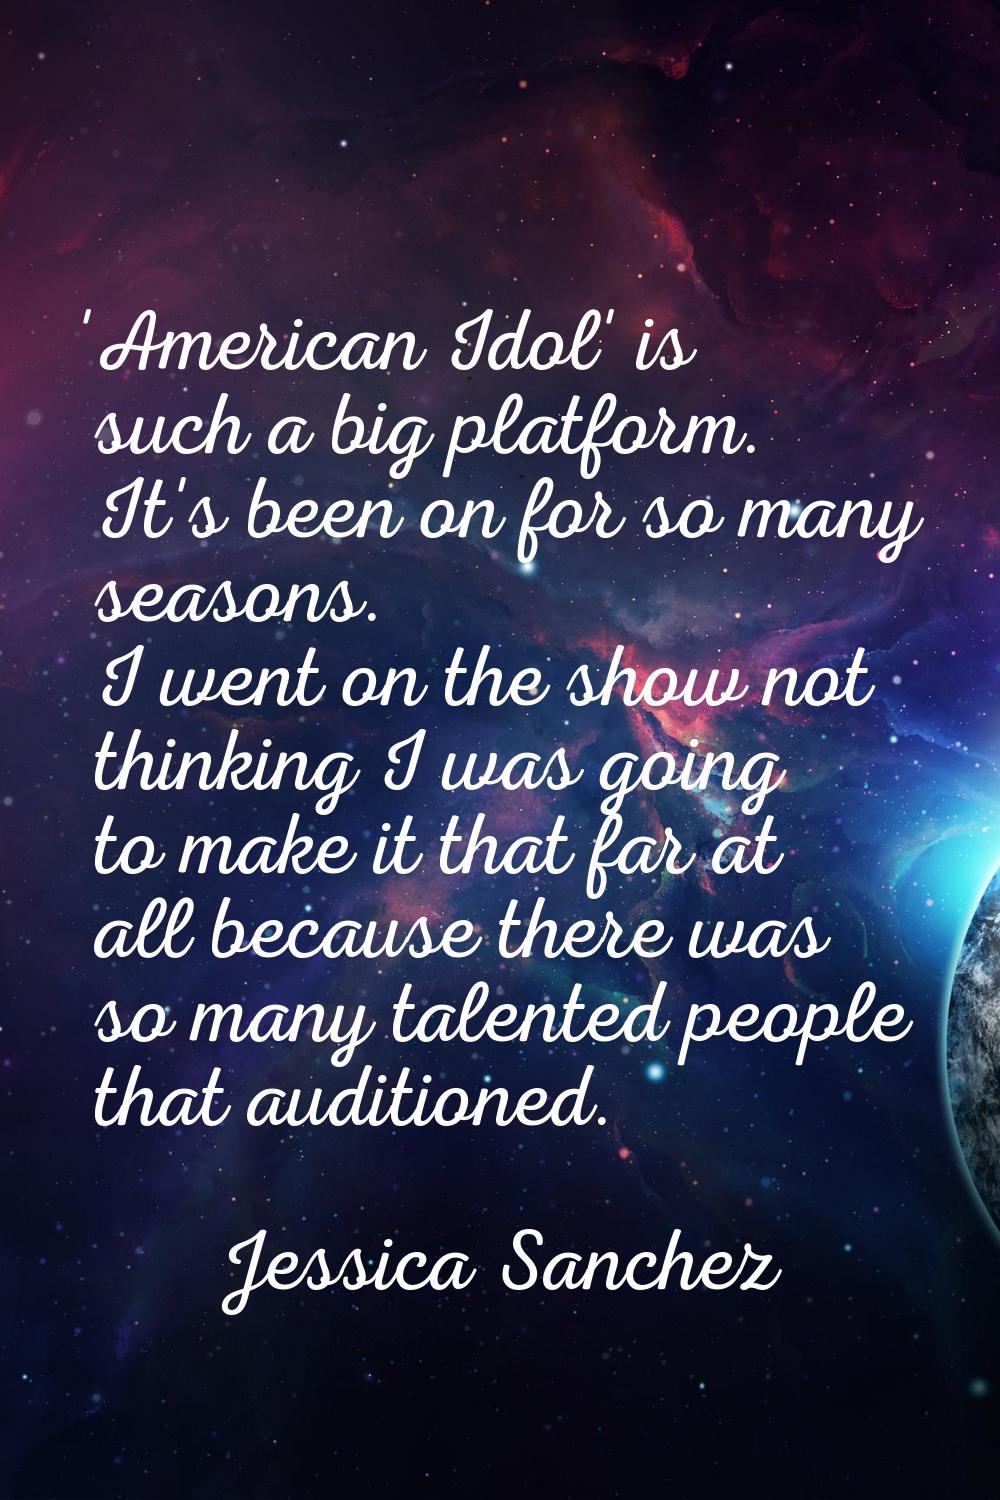 'American Idol' is such a big platform. It's been on for so many seasons. I went on the show not th